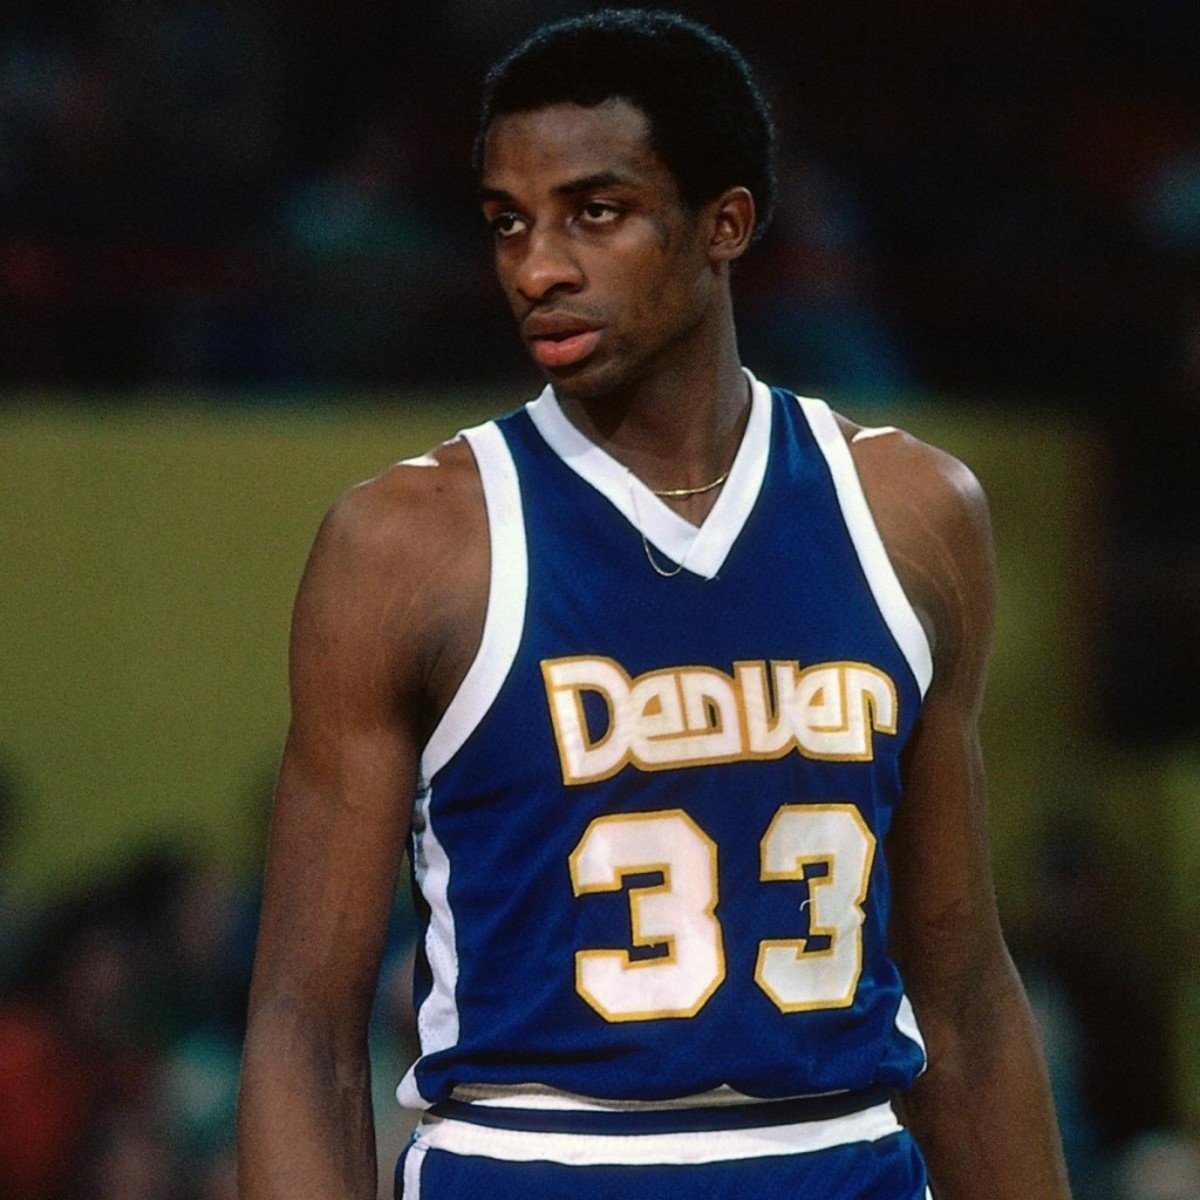 hi-res-89746937-david-thompson-of-the-denver-nuggets-looks-on-against_crop_exact